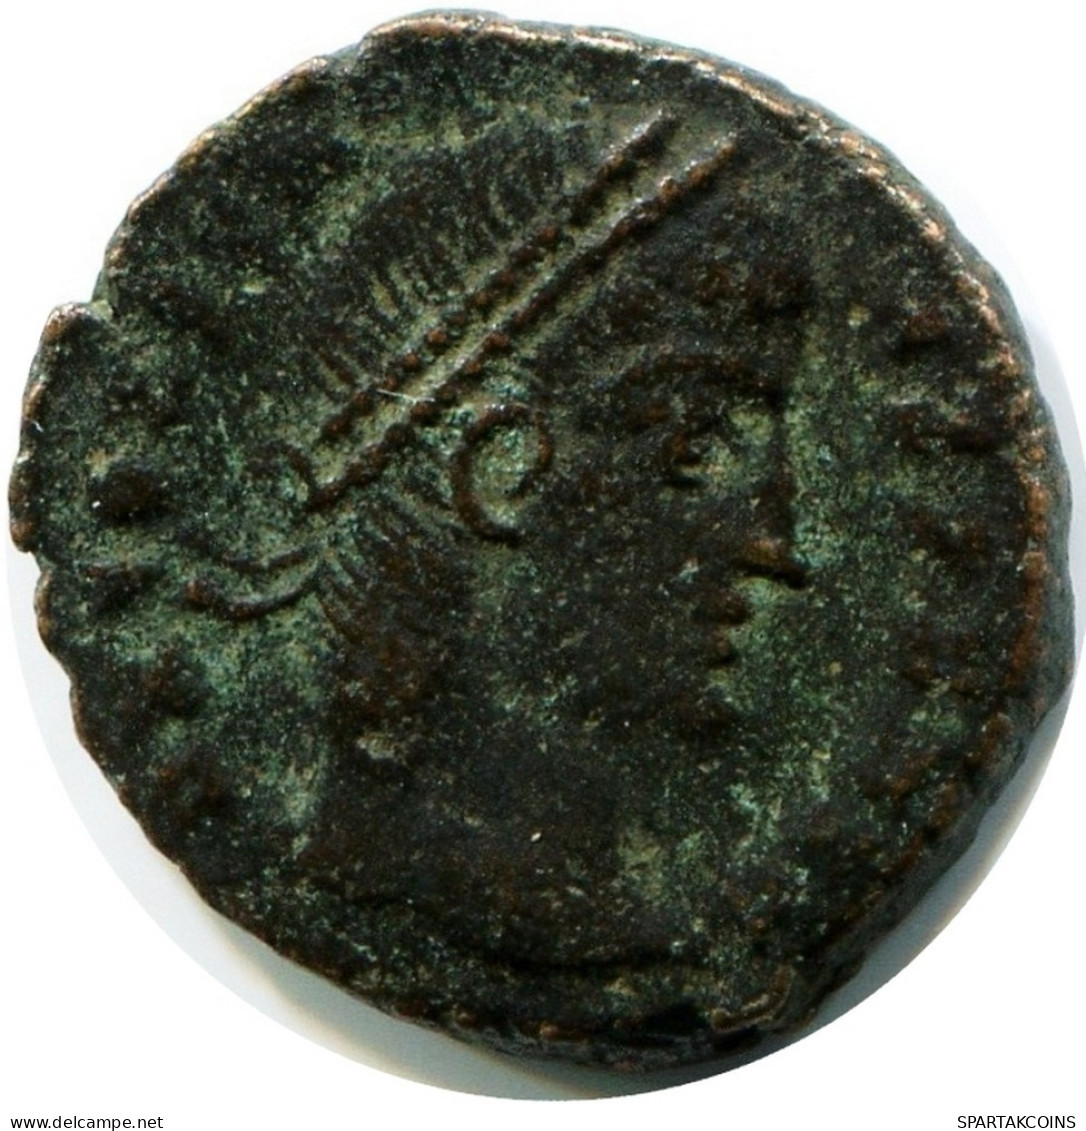 CONSTANS MINTED IN CYZICUS FROM THE ROYAL ONTARIO MUSEUM #ANC11591.14.D.A - The Christian Empire (307 AD To 363 AD)